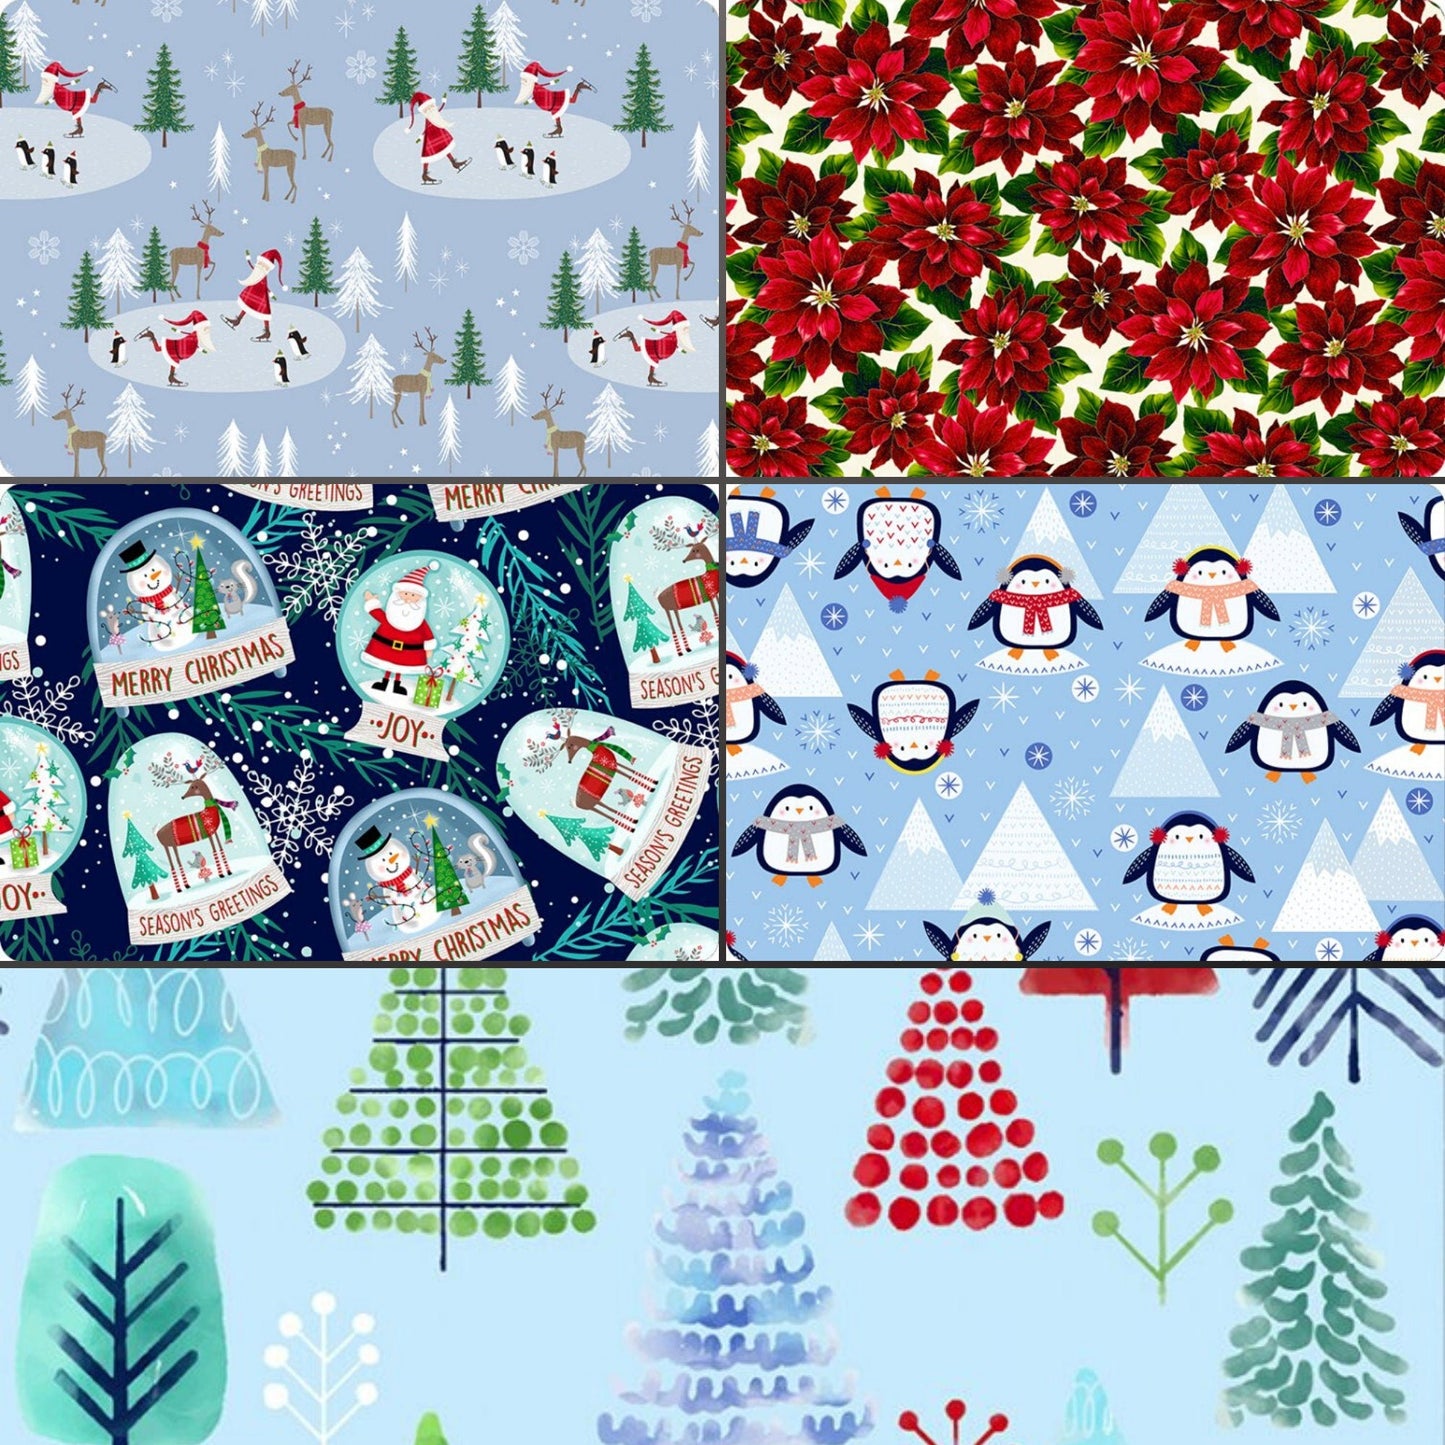 Shannon Fabrics Fabric Hoffman Holiday Red Poinsettia Digital Cuddle® Snow Fabric Minky while supplies last